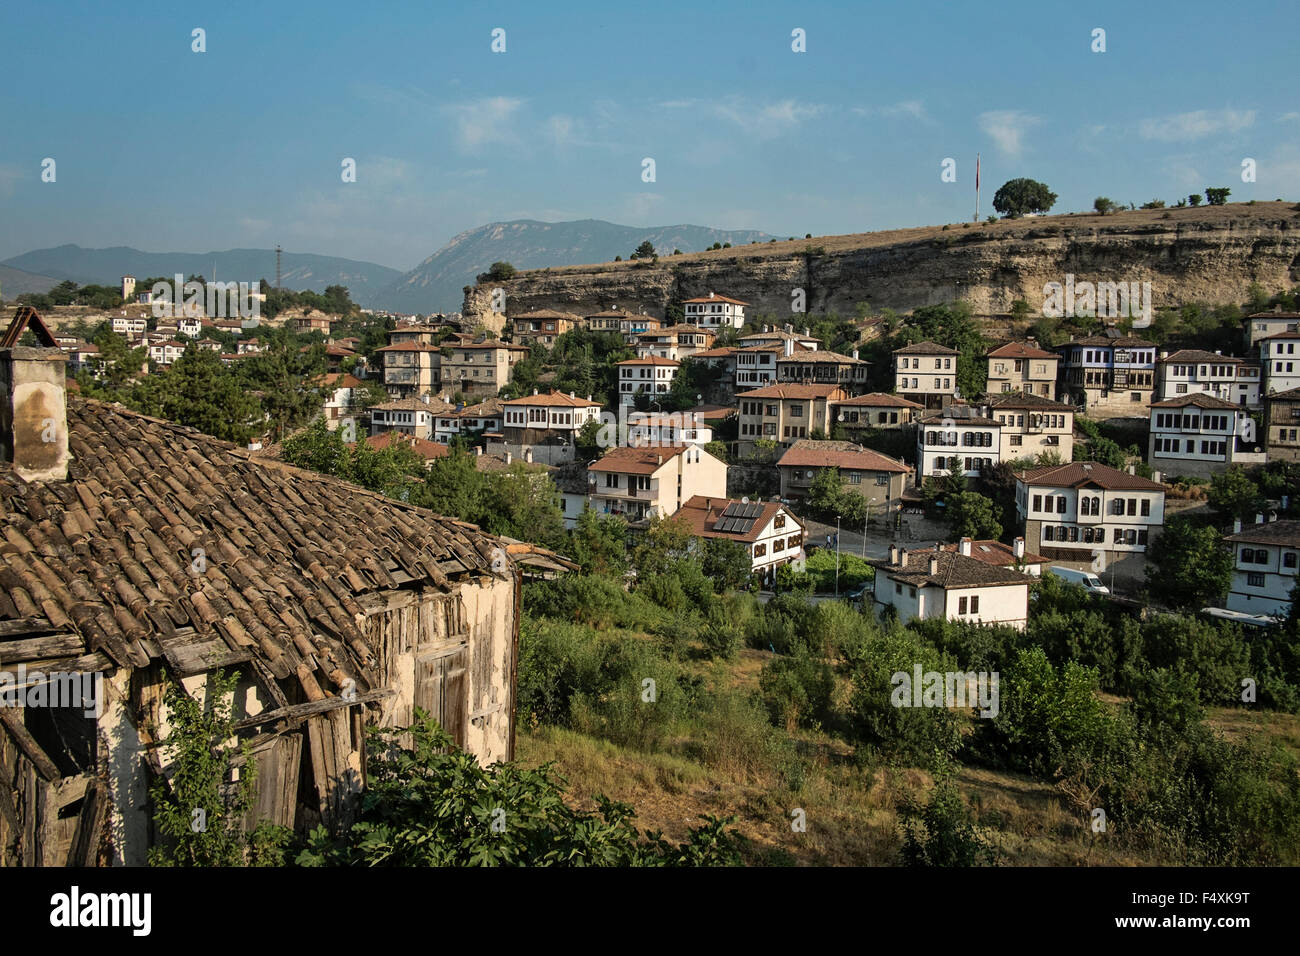 Traditional Ottoman buildings in the old section of Safranbolu, Turkey Stock Photo